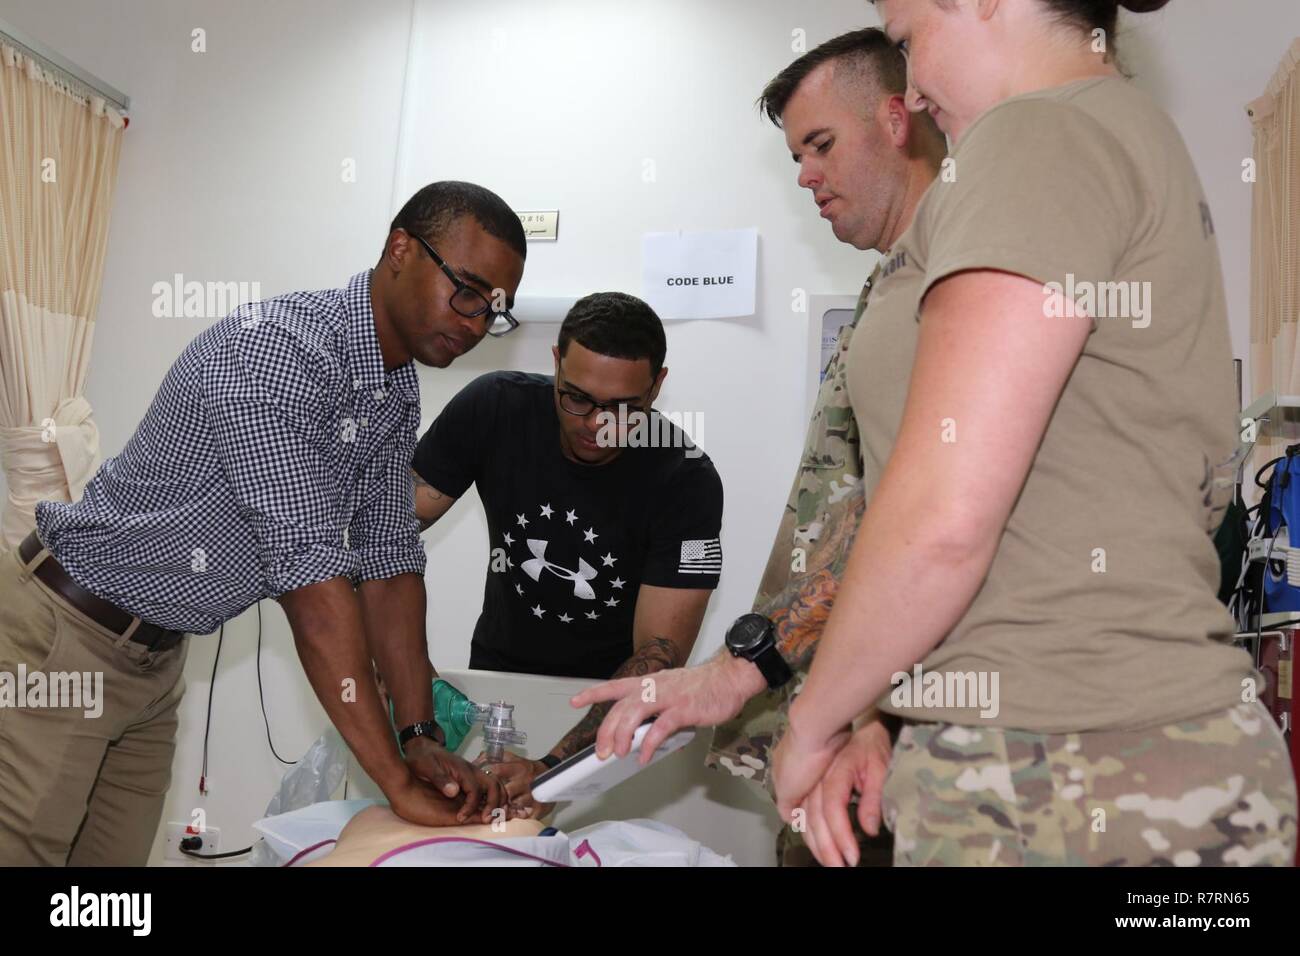 U.S. Army 1st Lt. David Johnson (left) is assisted by Soldiers from the 215th Brigade Support Battalion, while practicing code blue techniques using an Resusci Anne QCPR and an Ambu bag (manual respiratory ventilation), April 1, at Camp Arifjan, Kuwait. The medical refresher training, conducted by the 31st Combat Support Hospital, was for U.S. Army Central area of operation’s nurses and medics, who do not always get chances to work with trauma assessments. Stock Photo